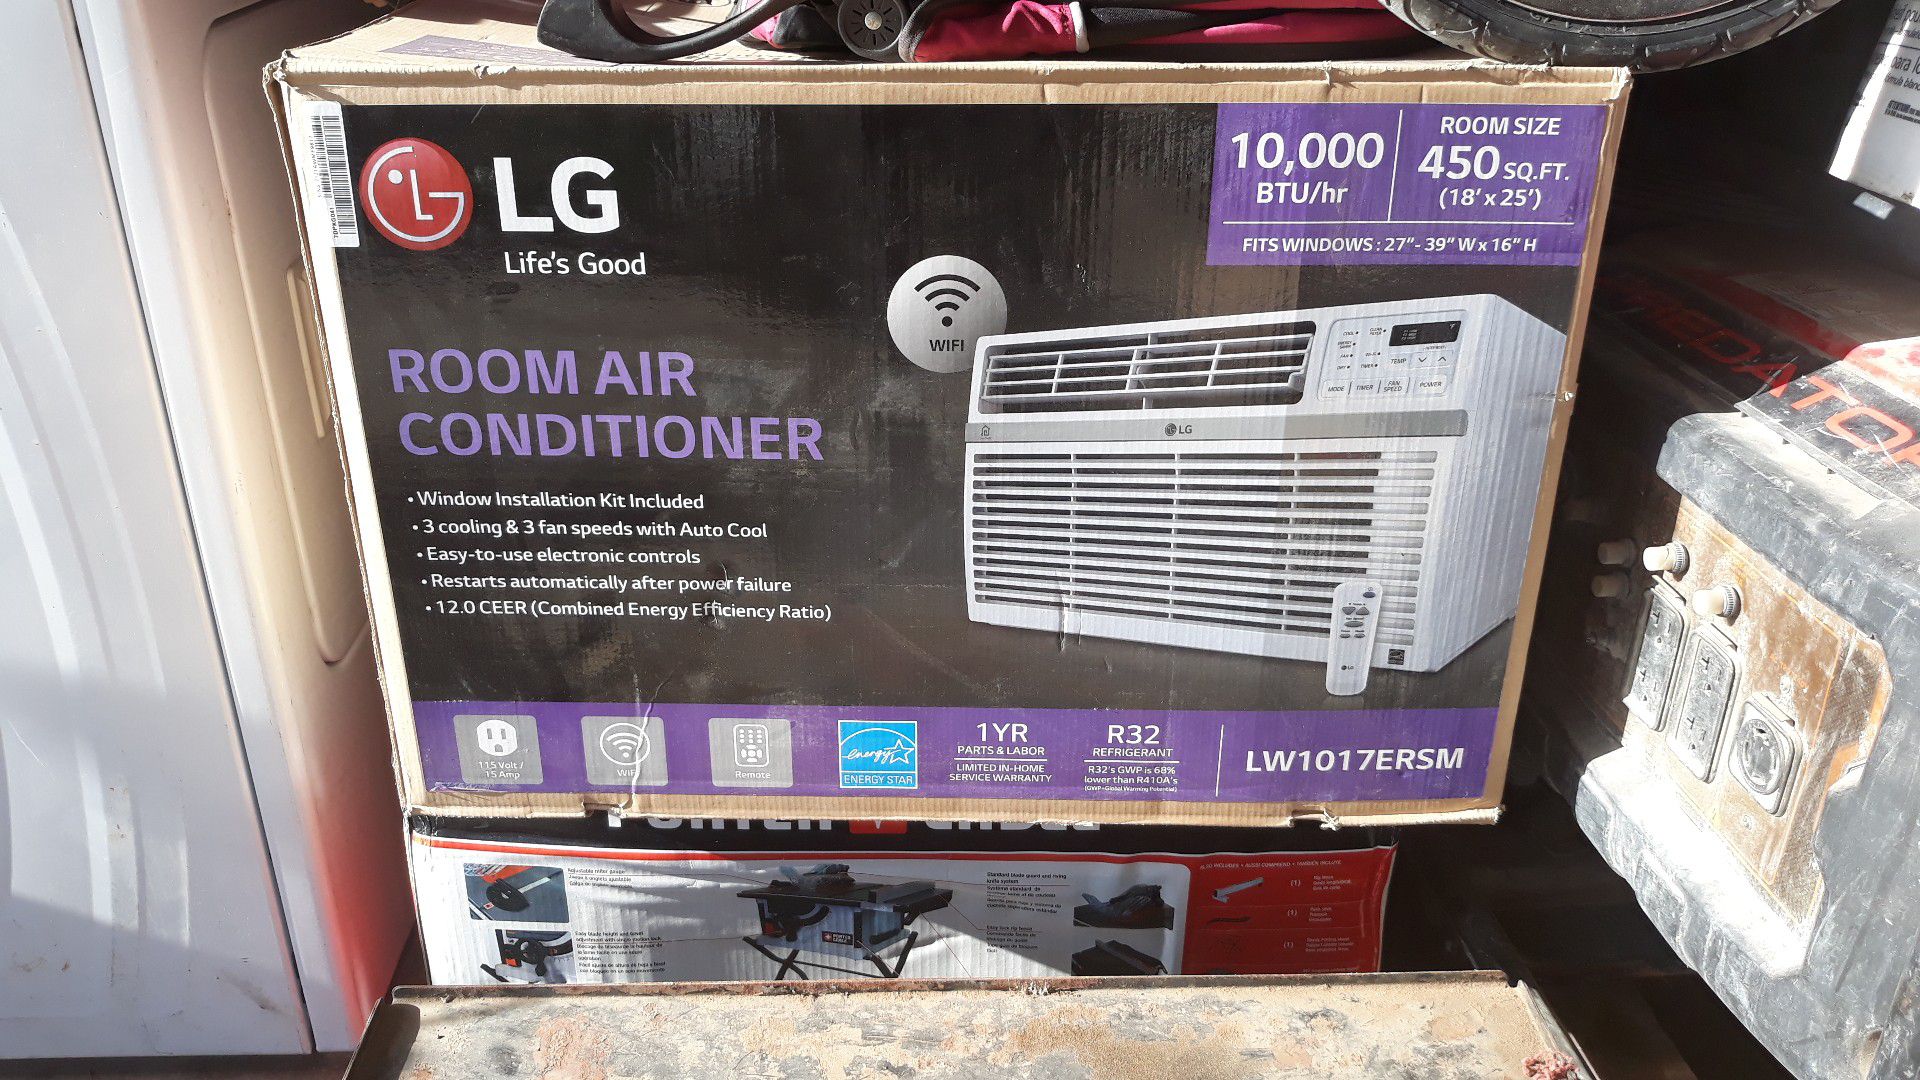 LG Air conditioner 10.000 btu/hr. 18x25 cools 450sqf comes with the remote